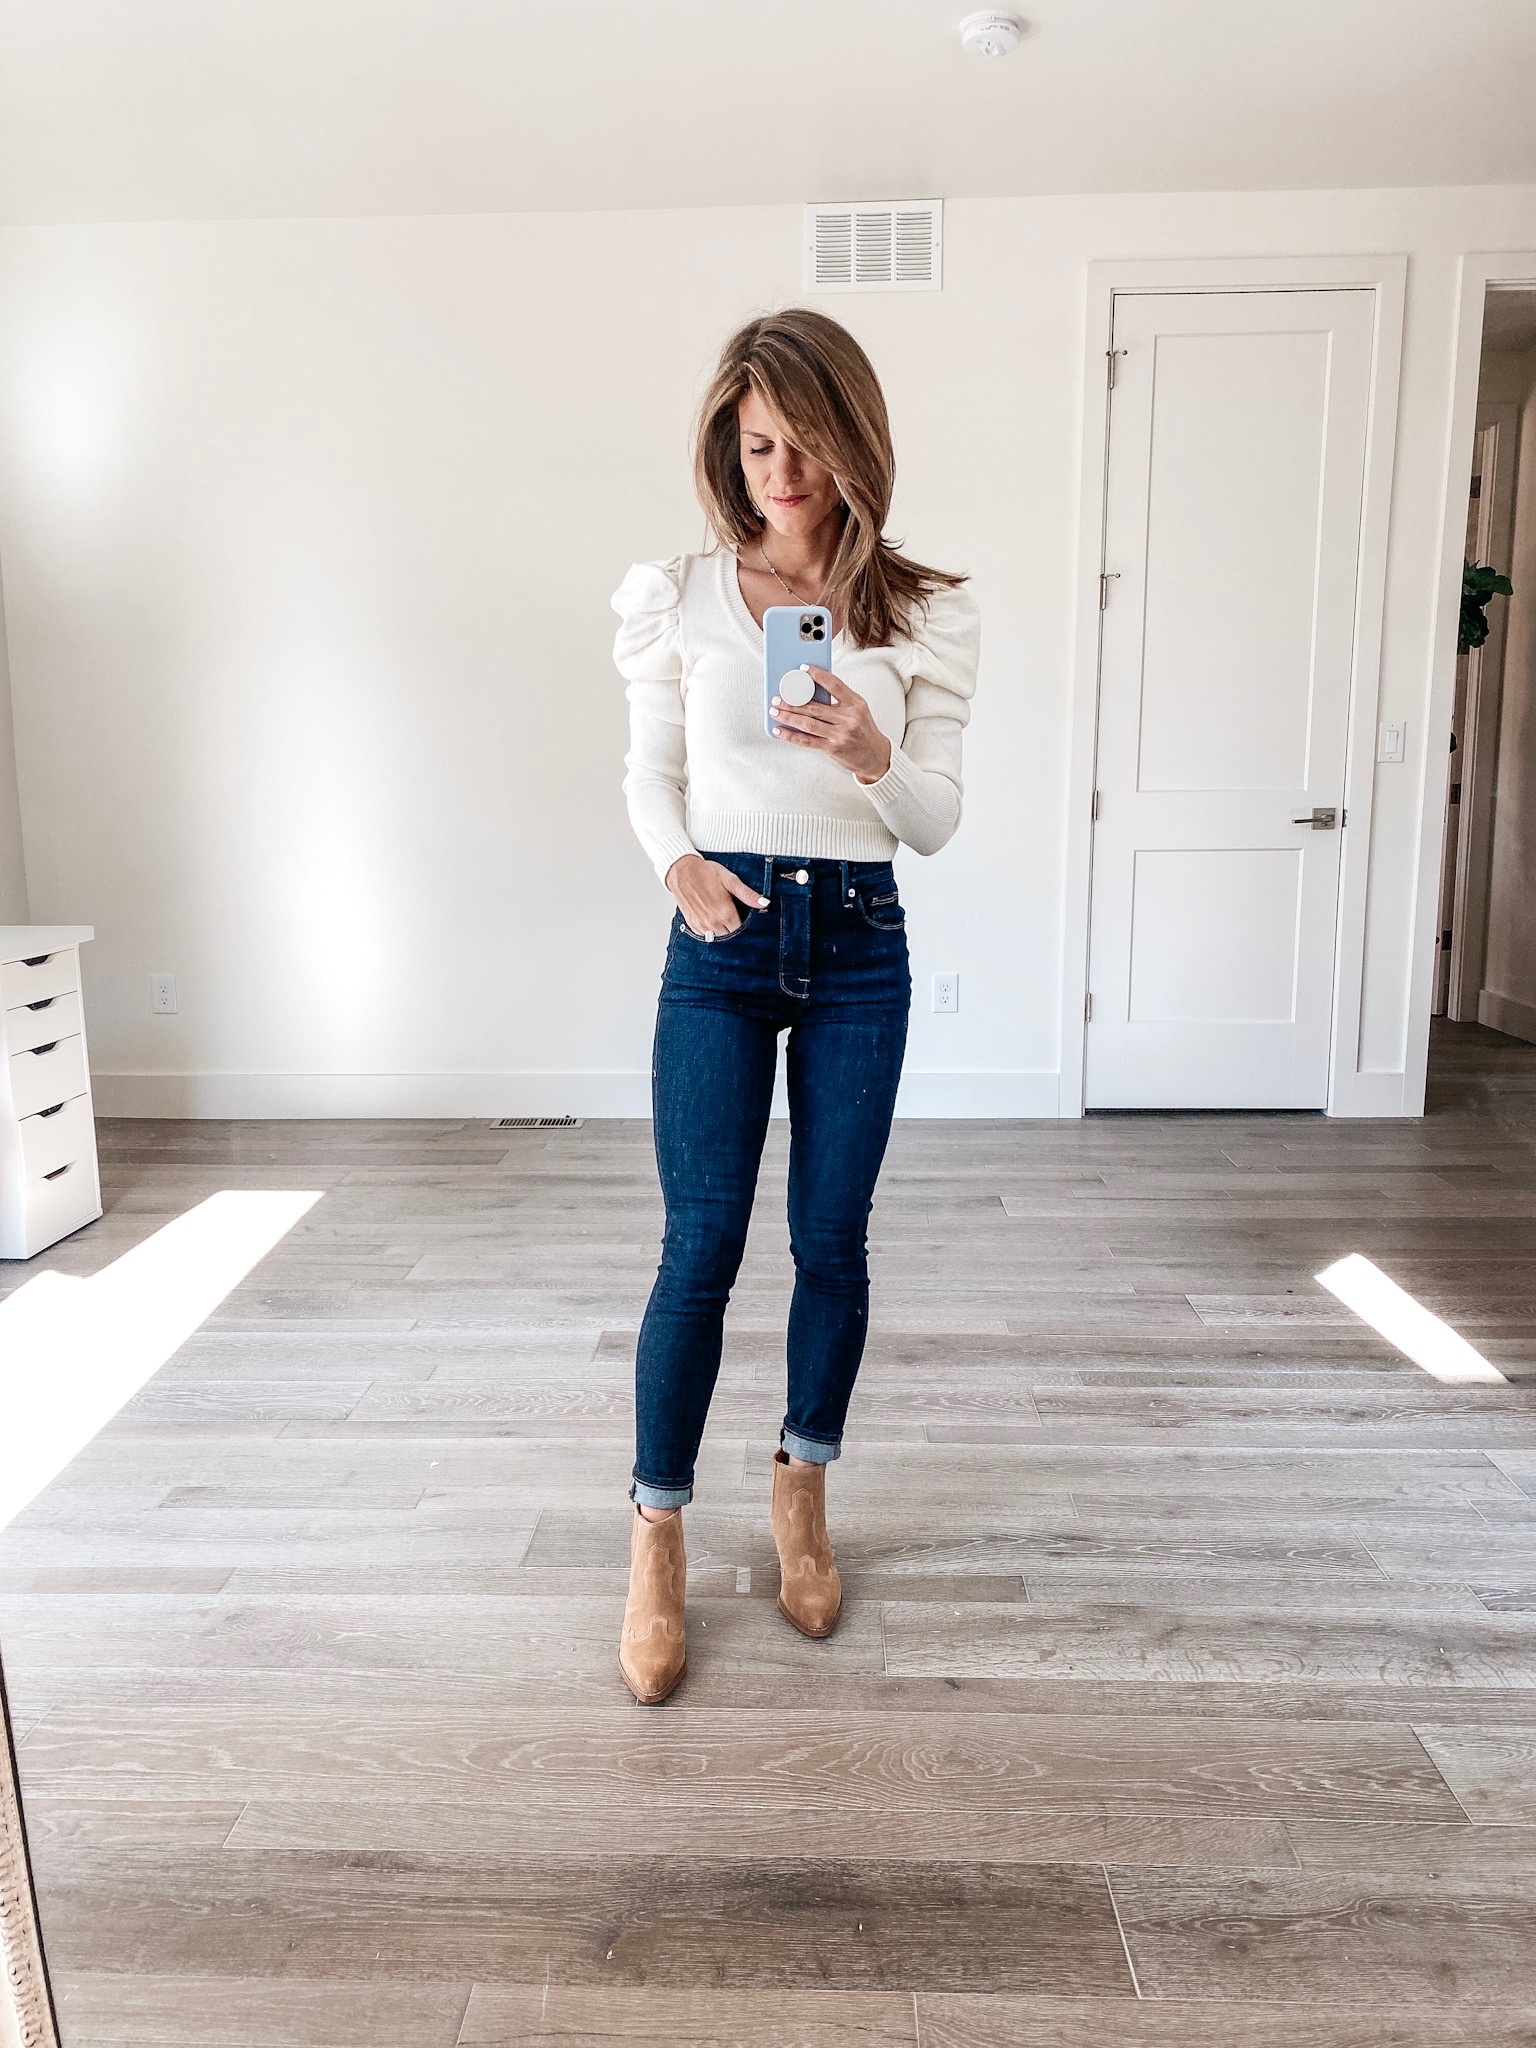 brighton keller wearing puff long sleeve top with button up jeans and tan booties